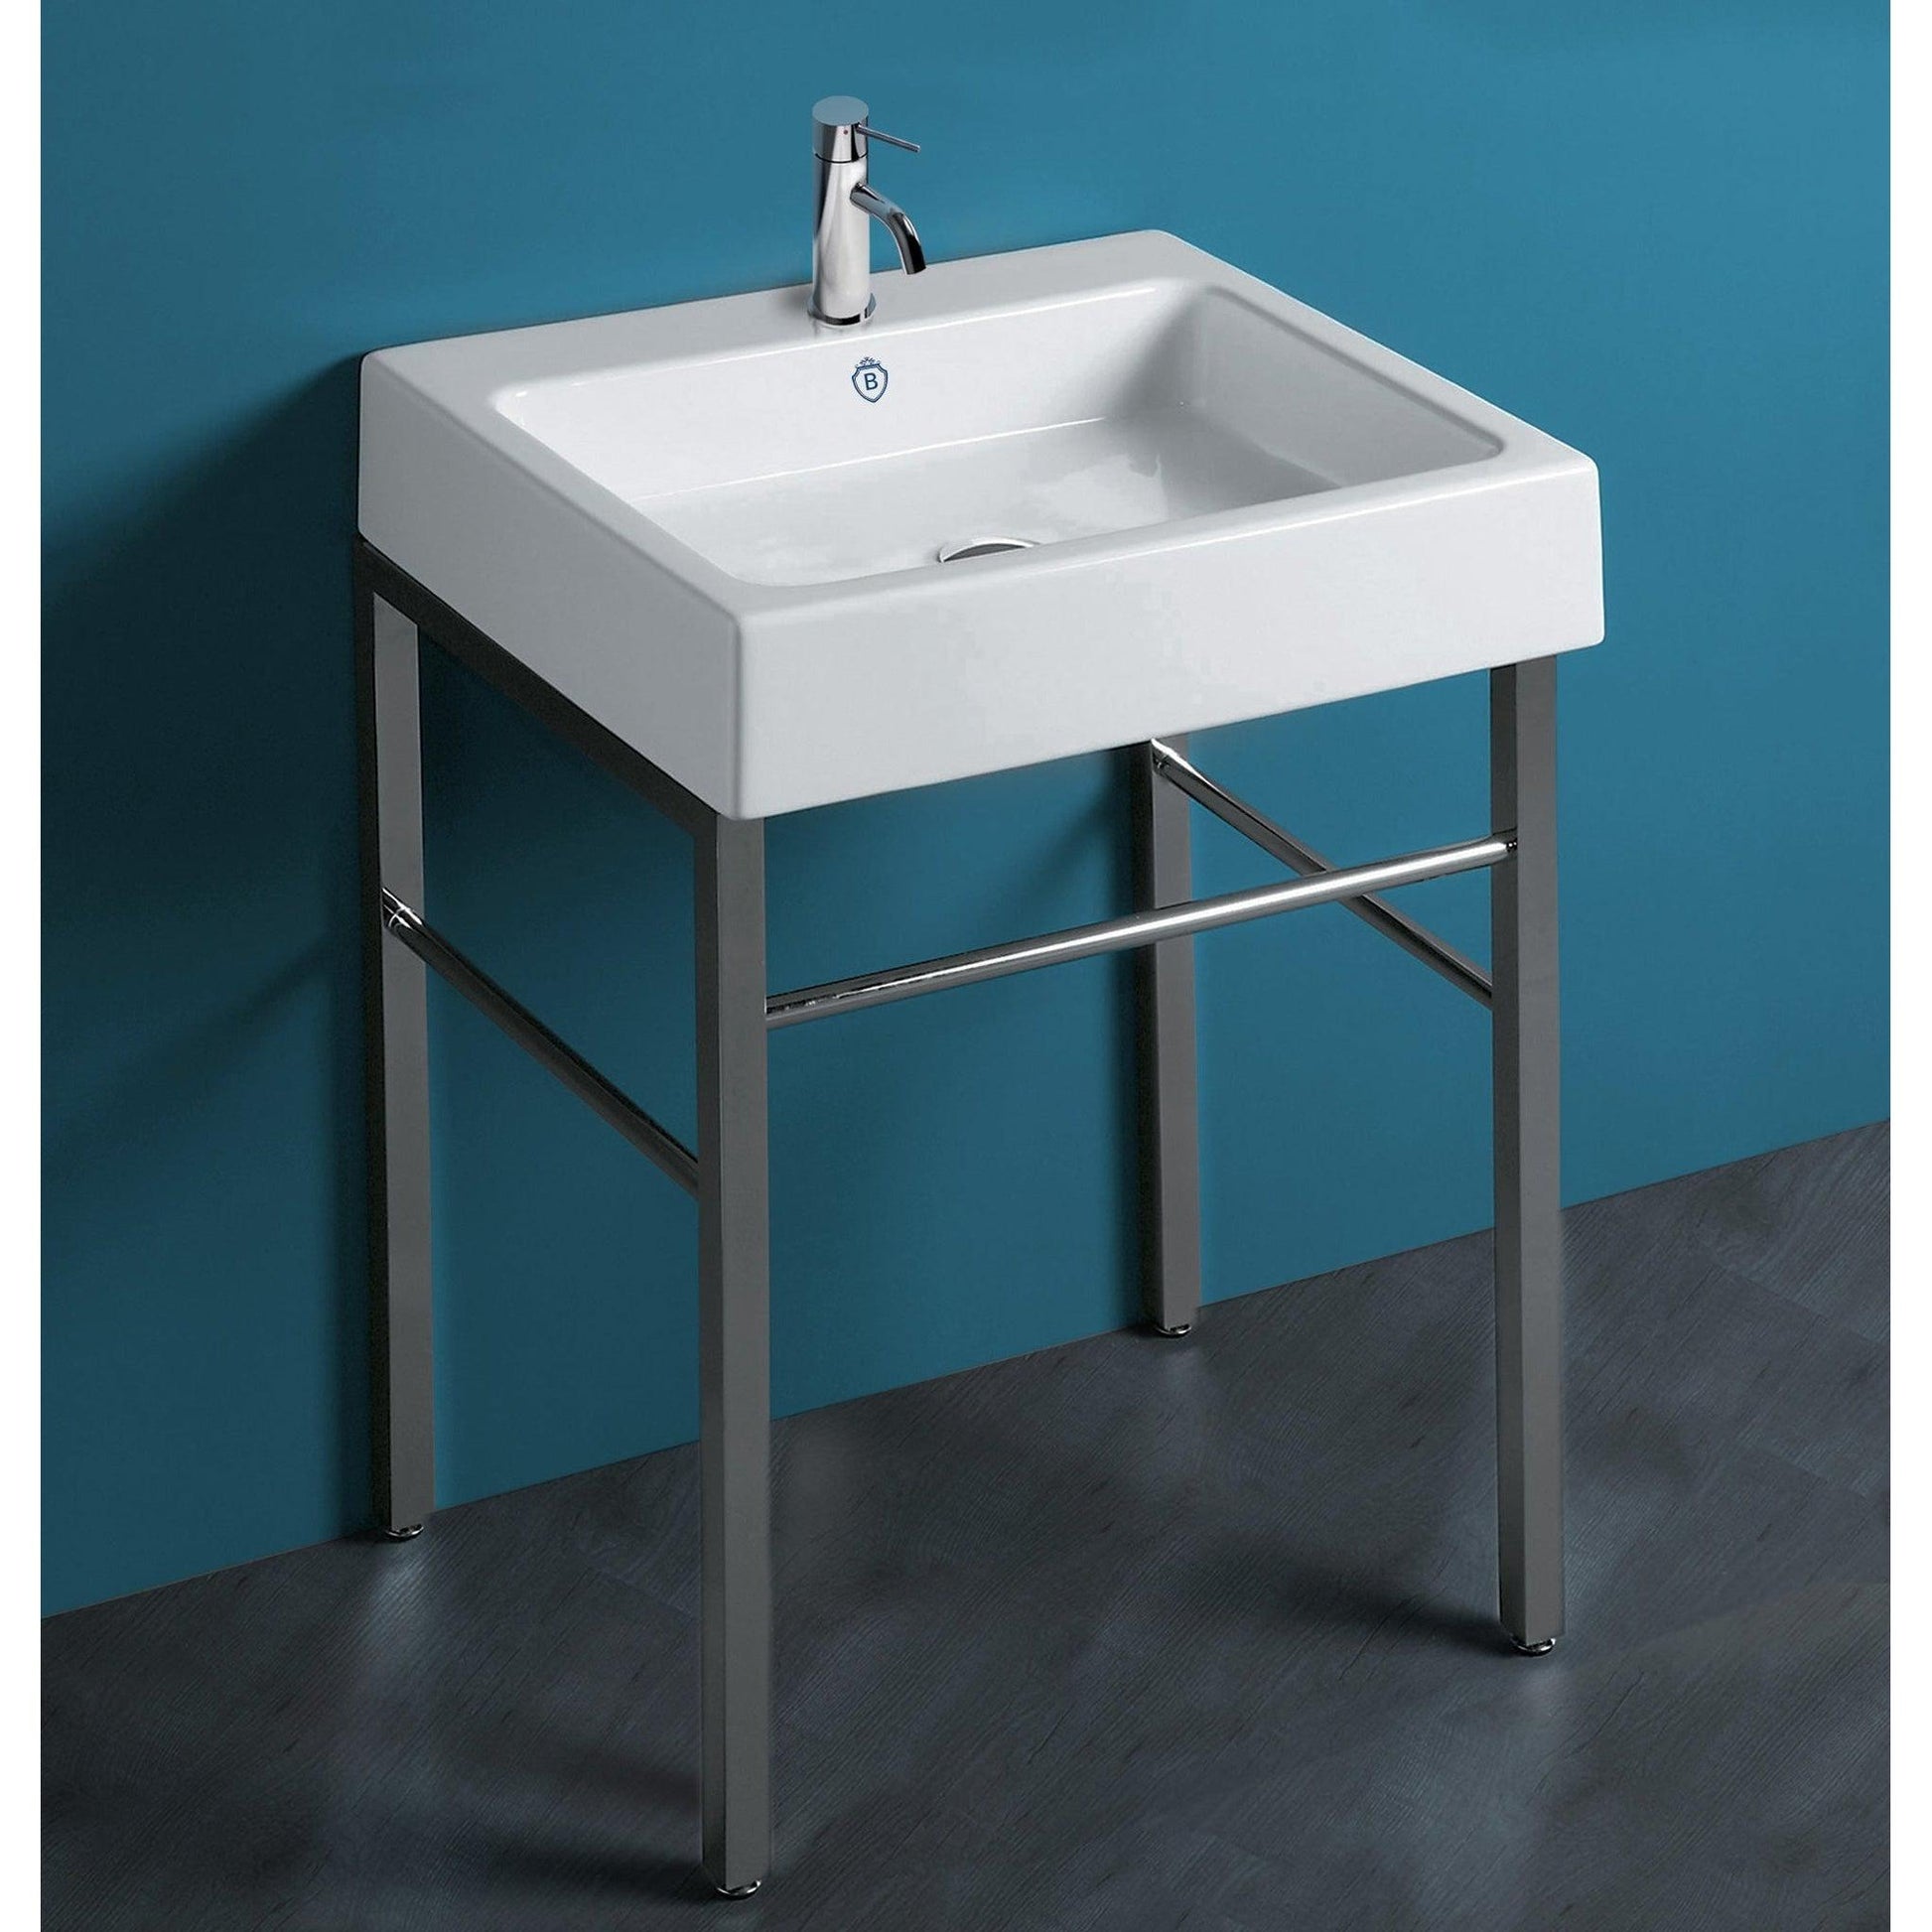 Whitehaus Britannia B-U60-DUCG1-A06-1 White/Chrome Rectangular Sink Console With Front Towel Bar and Single Faucet Hole Drill